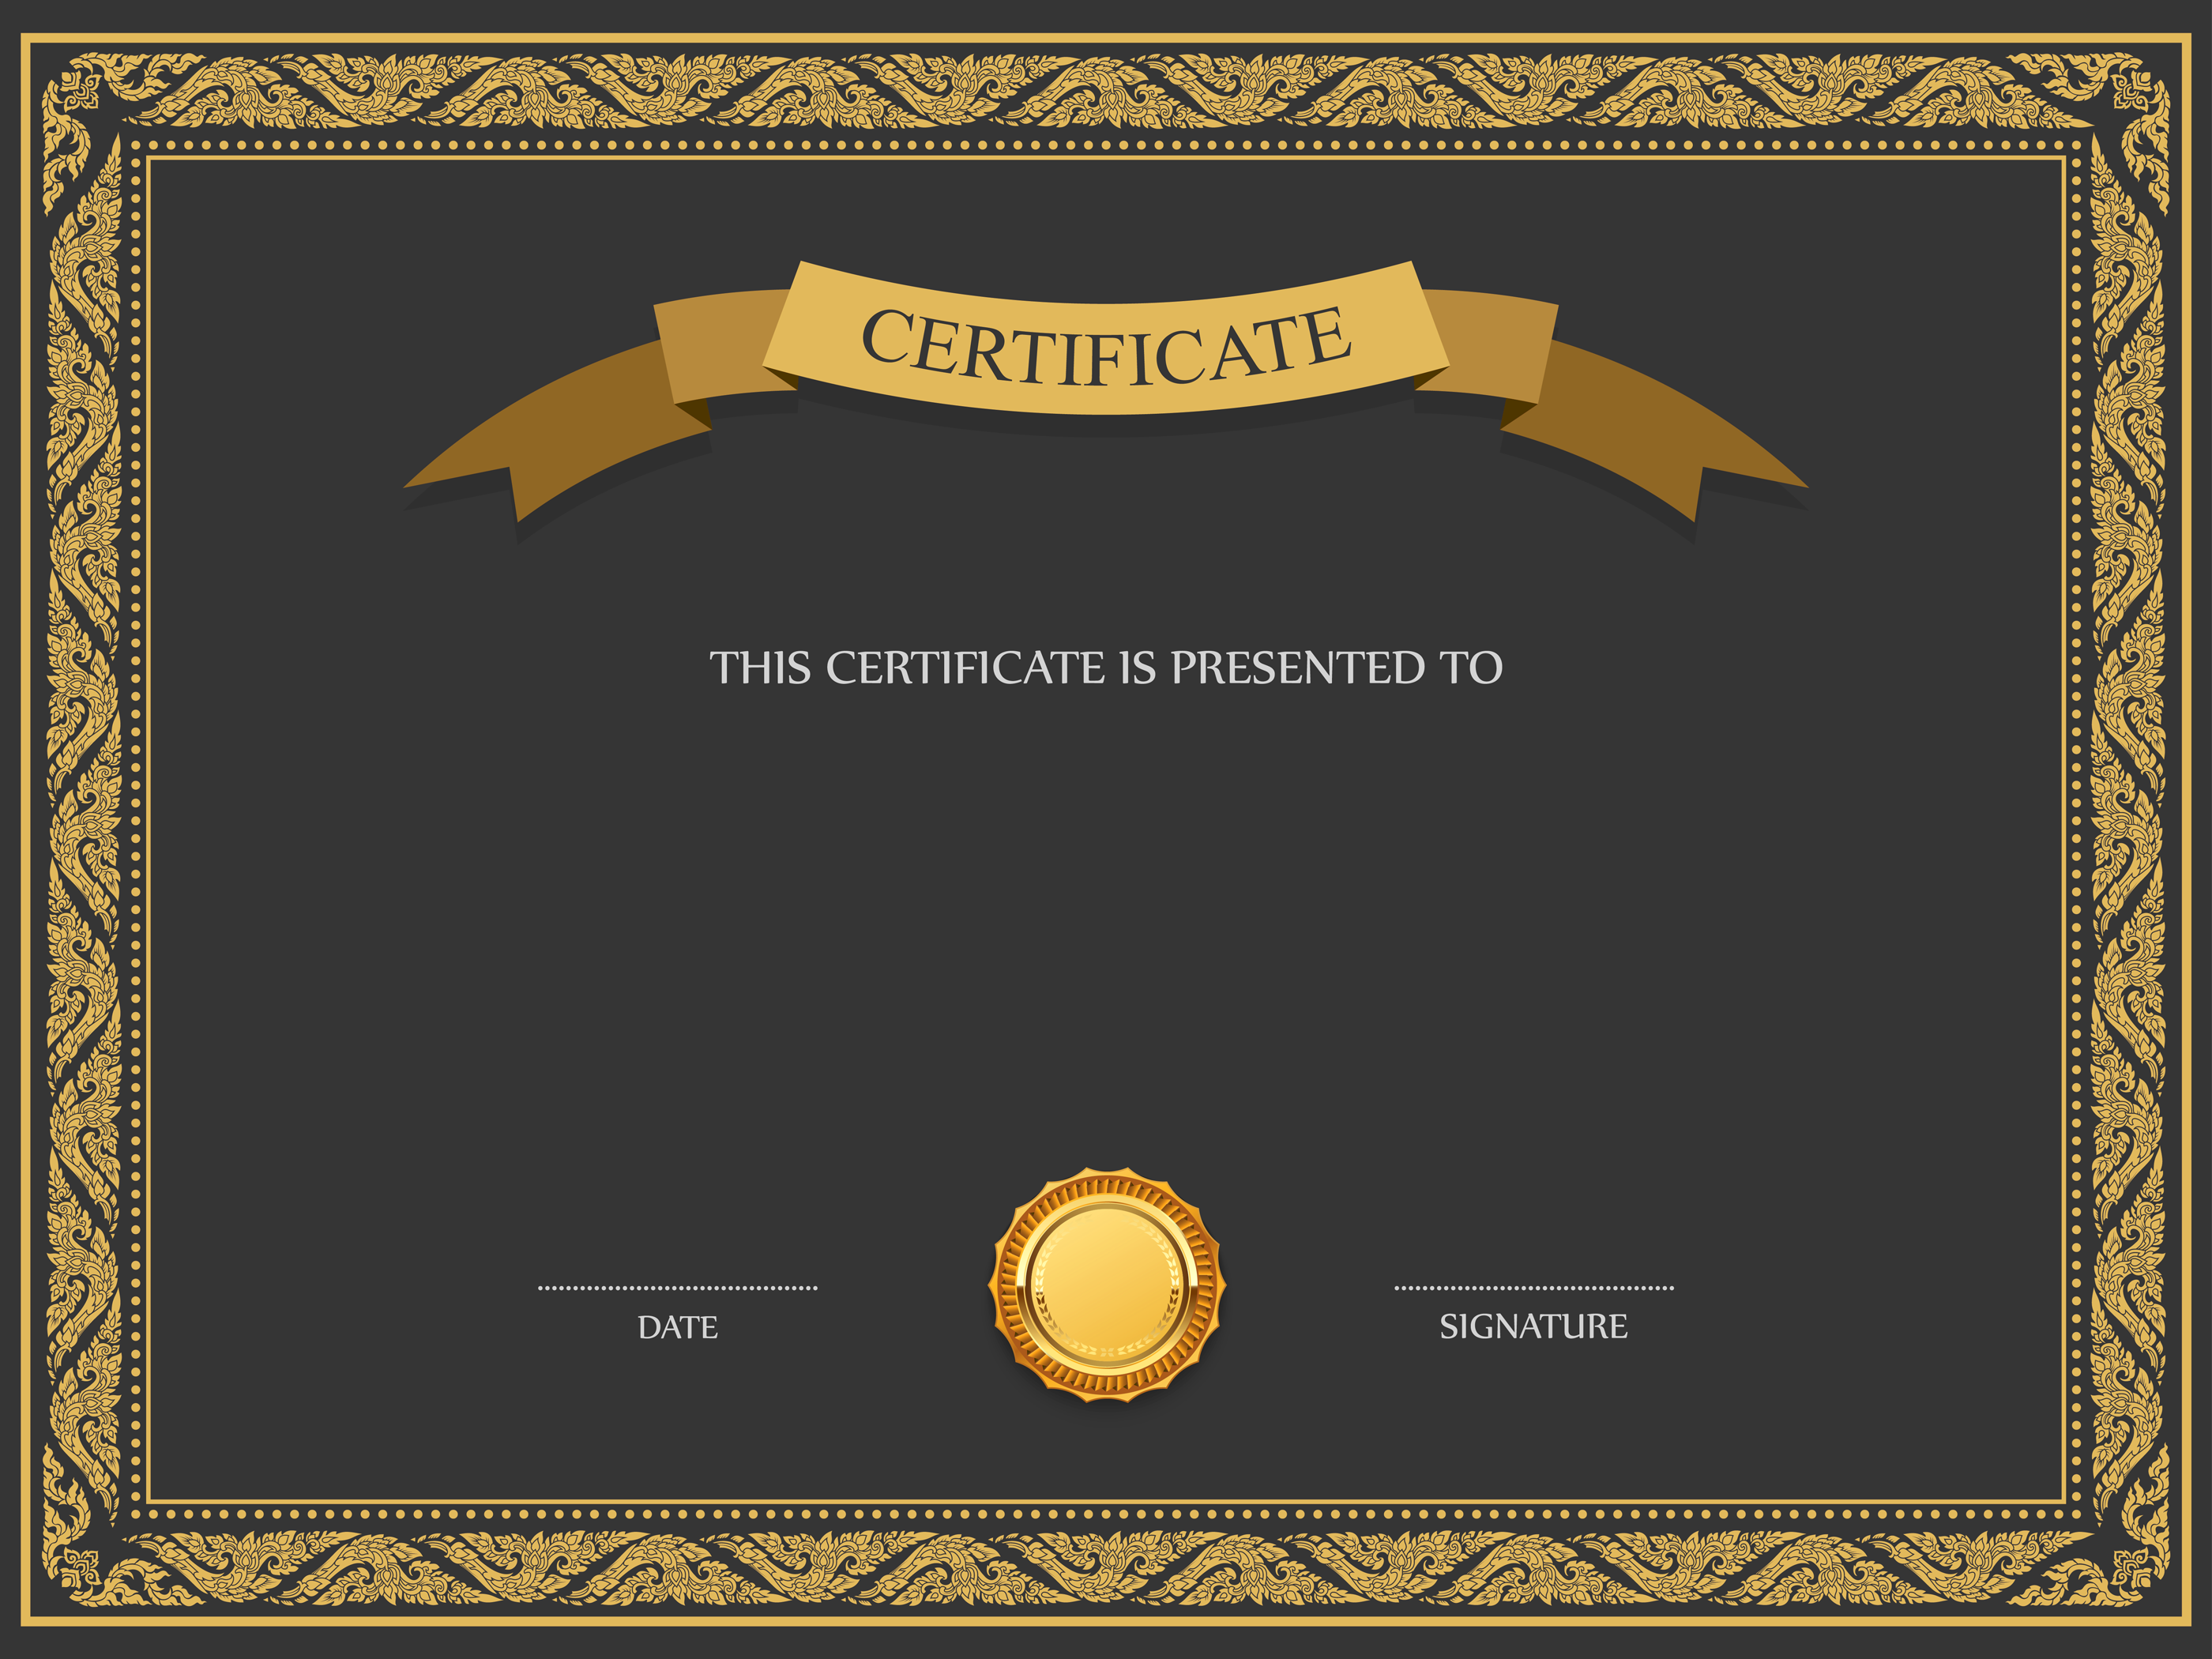 Certificate Template PNG Image